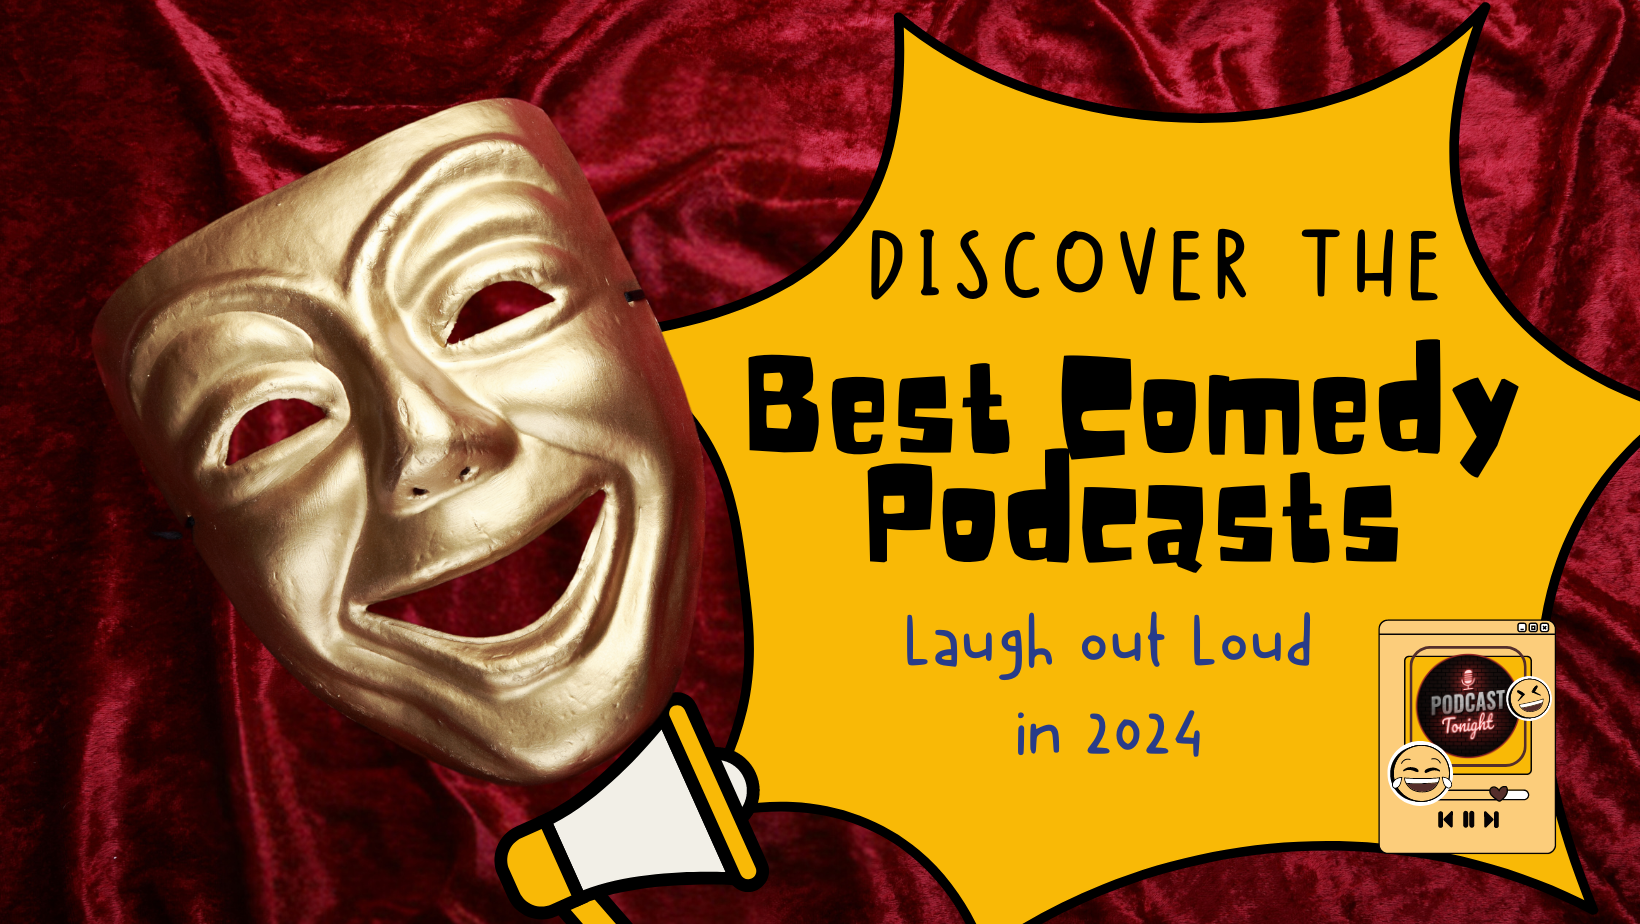 Laugh out Loud in 2024: Discover the Best Comedy Podcasts